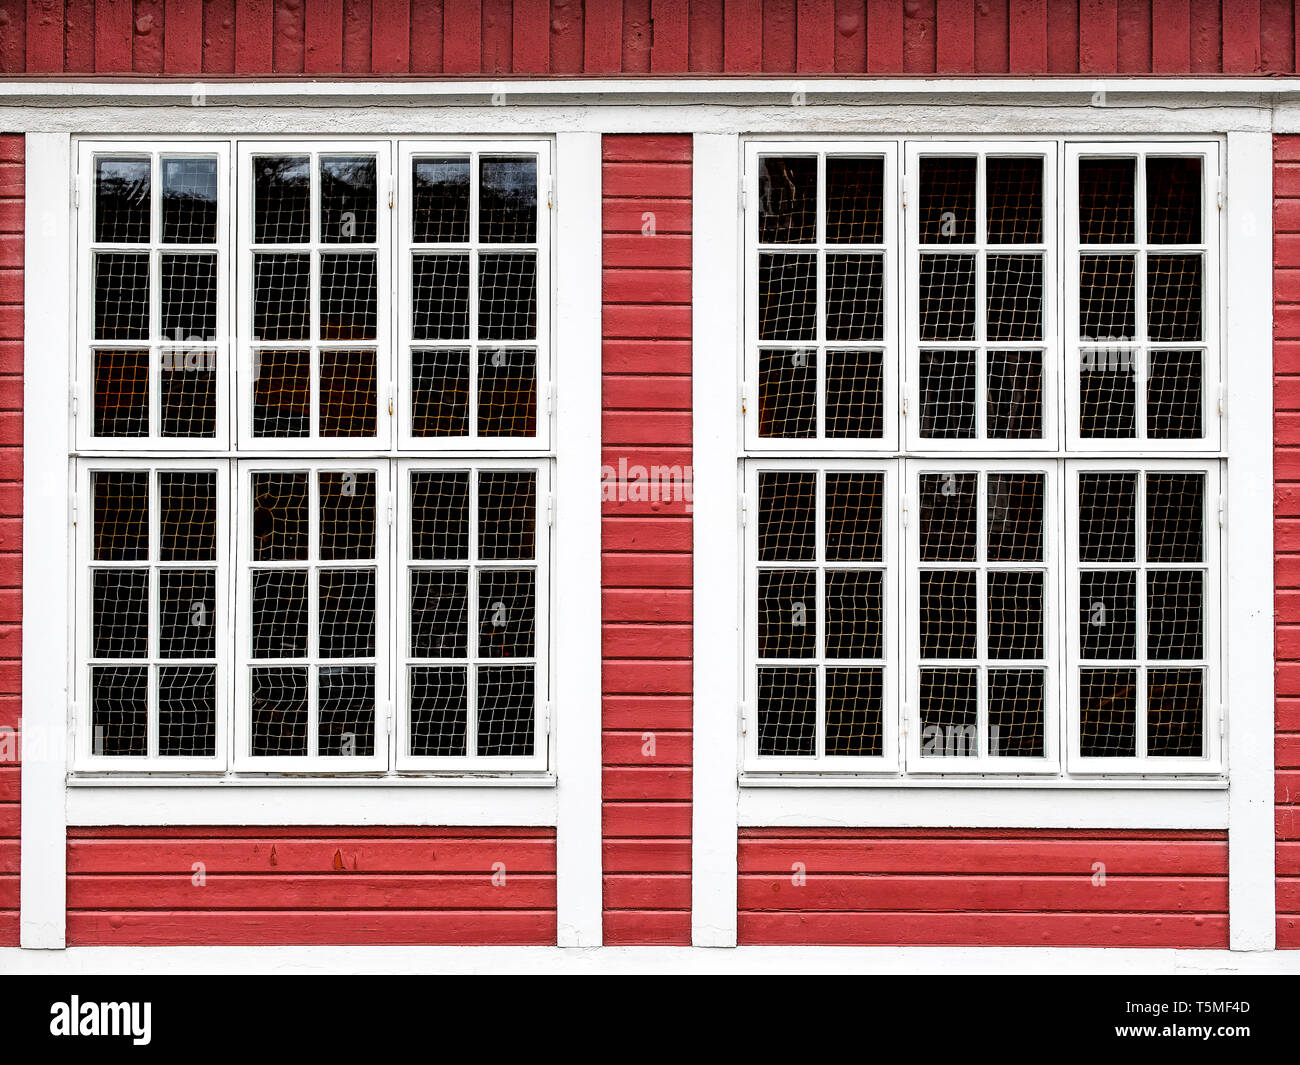 Big windows on a red wooden wall, with white framing along the windows. Stock Photo